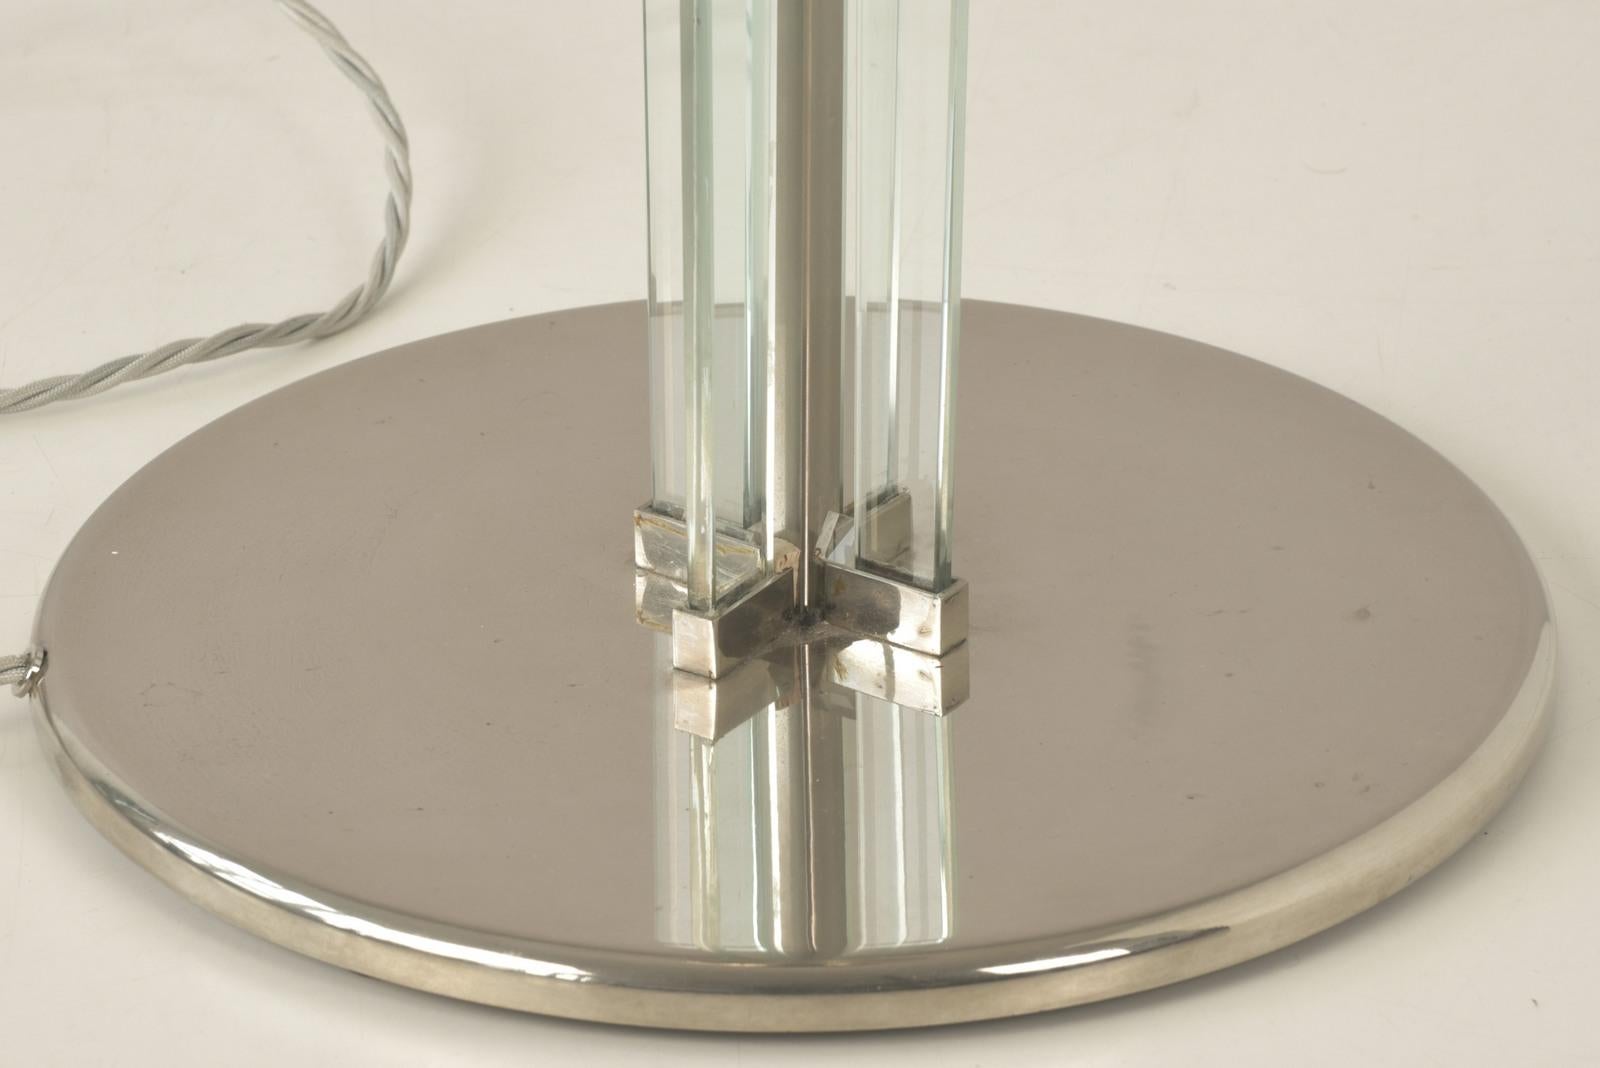 Art Deco Metal and Glass Floor Lamp, France - 1940s  For Sale 6